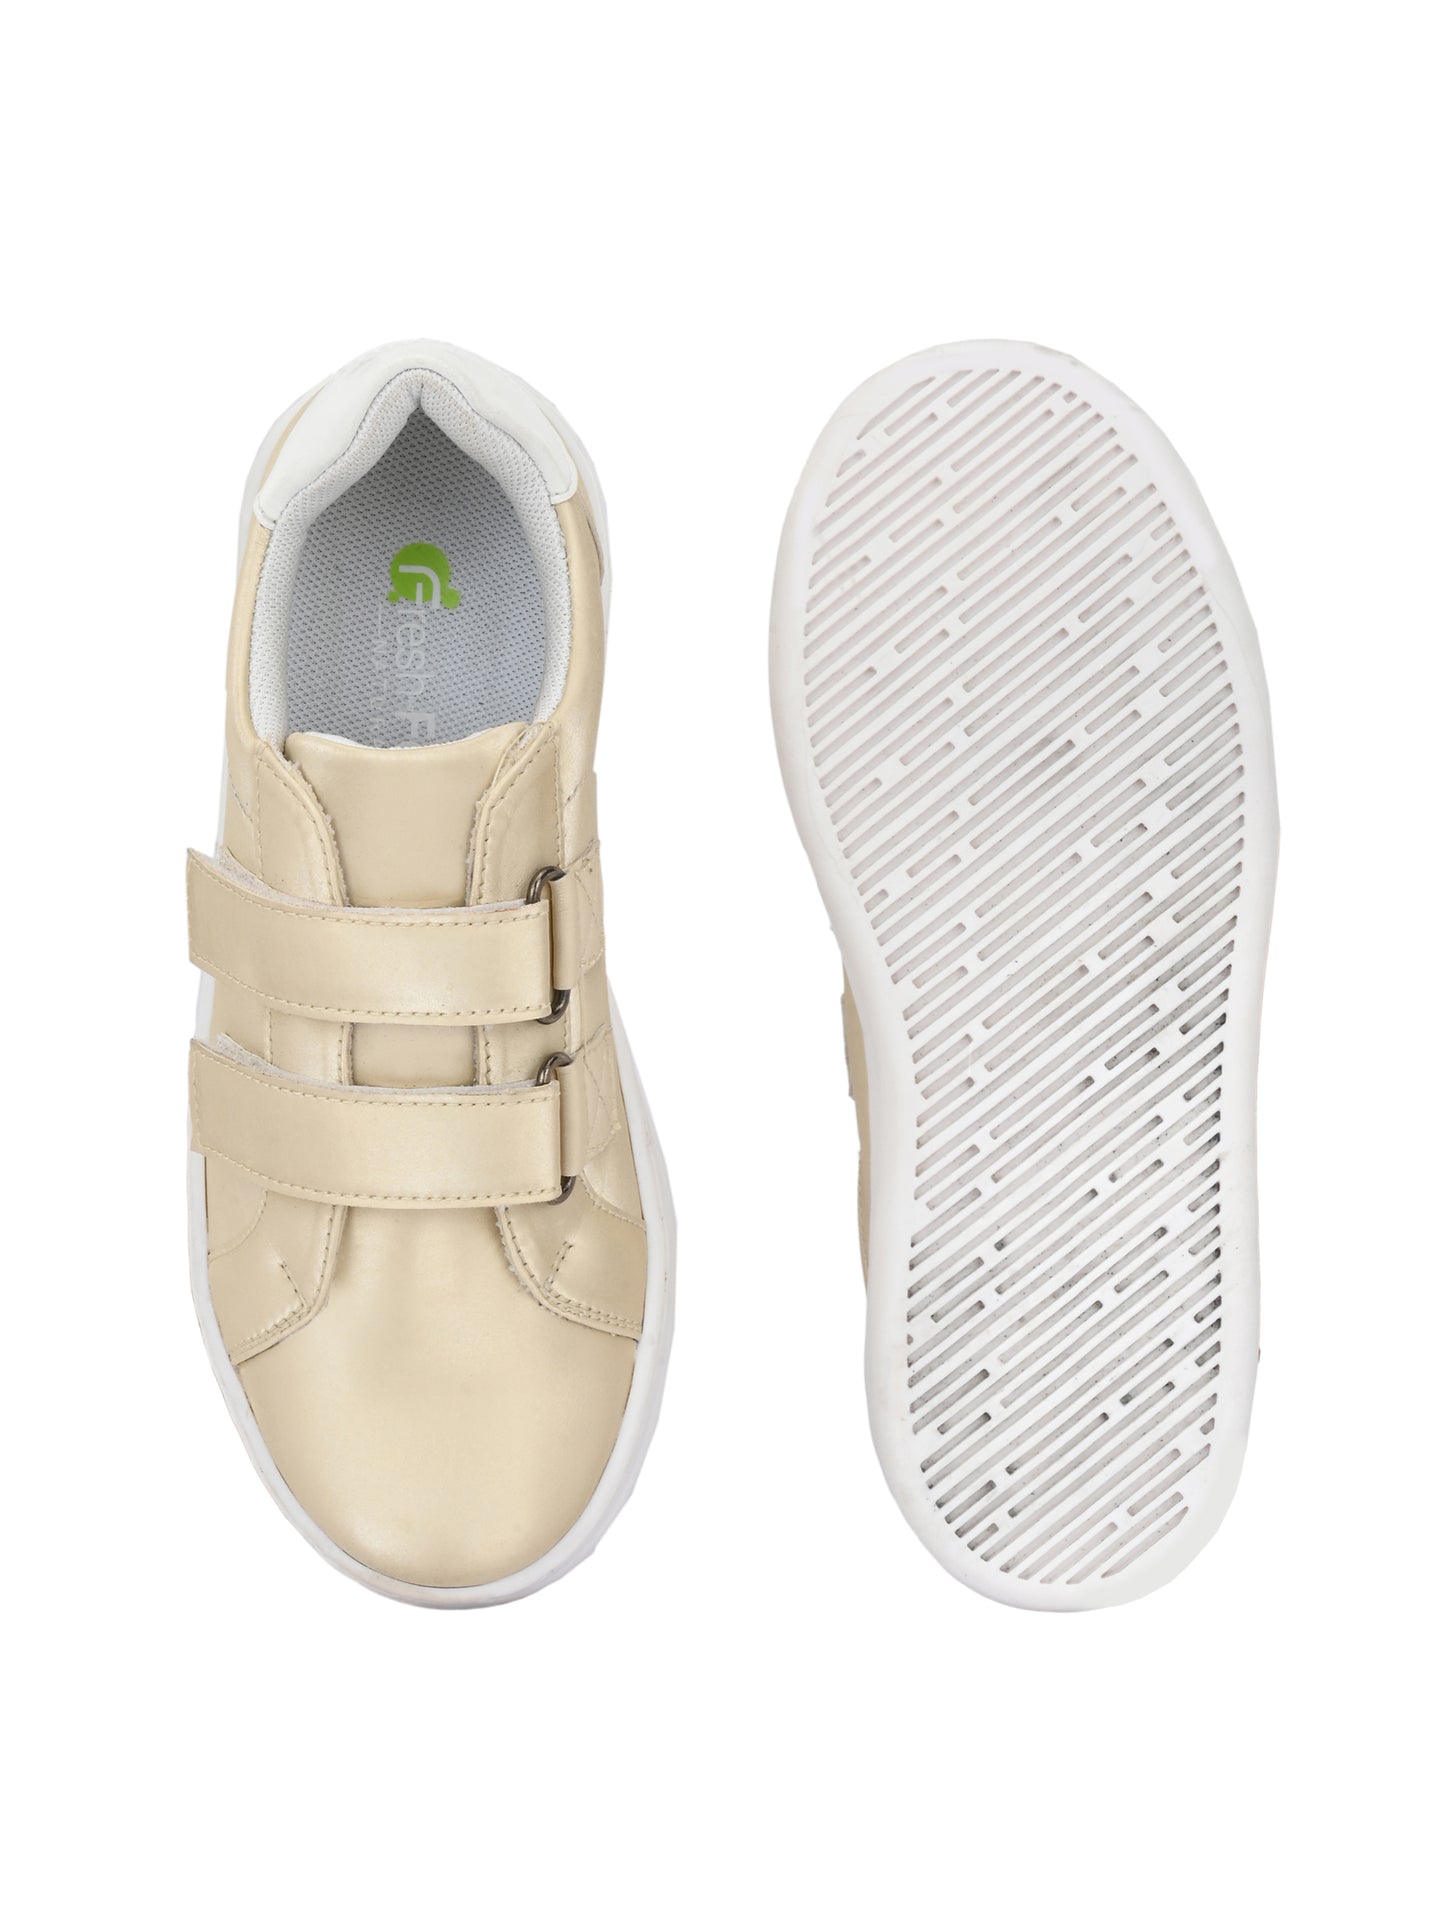 Chloe Gold Sneakers for Kids